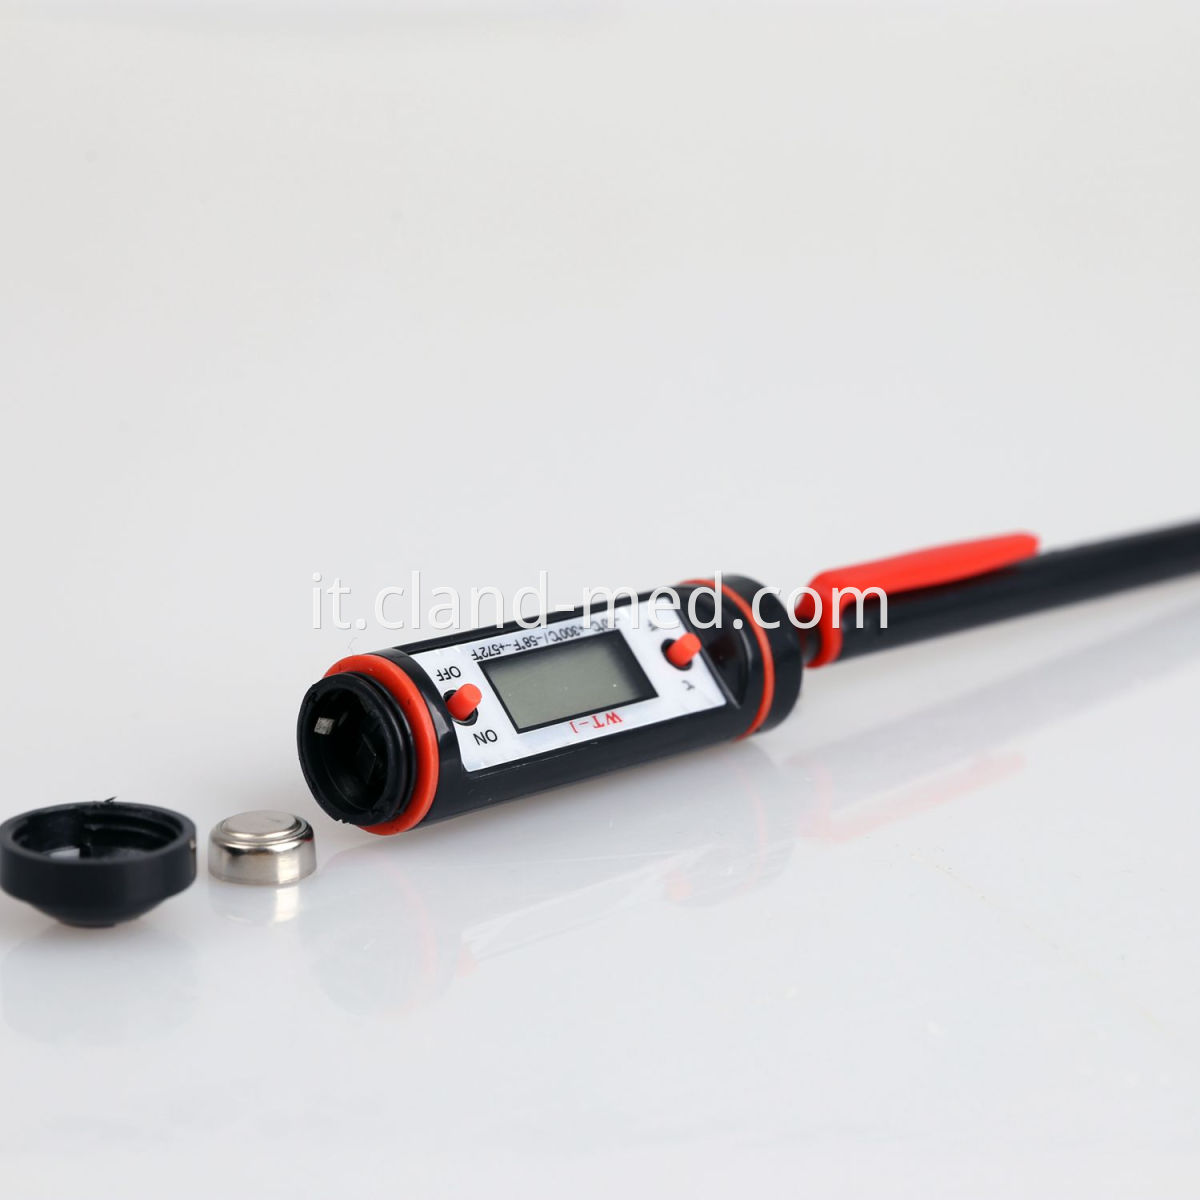 WT-1 FOOD THERMOMETER (5)